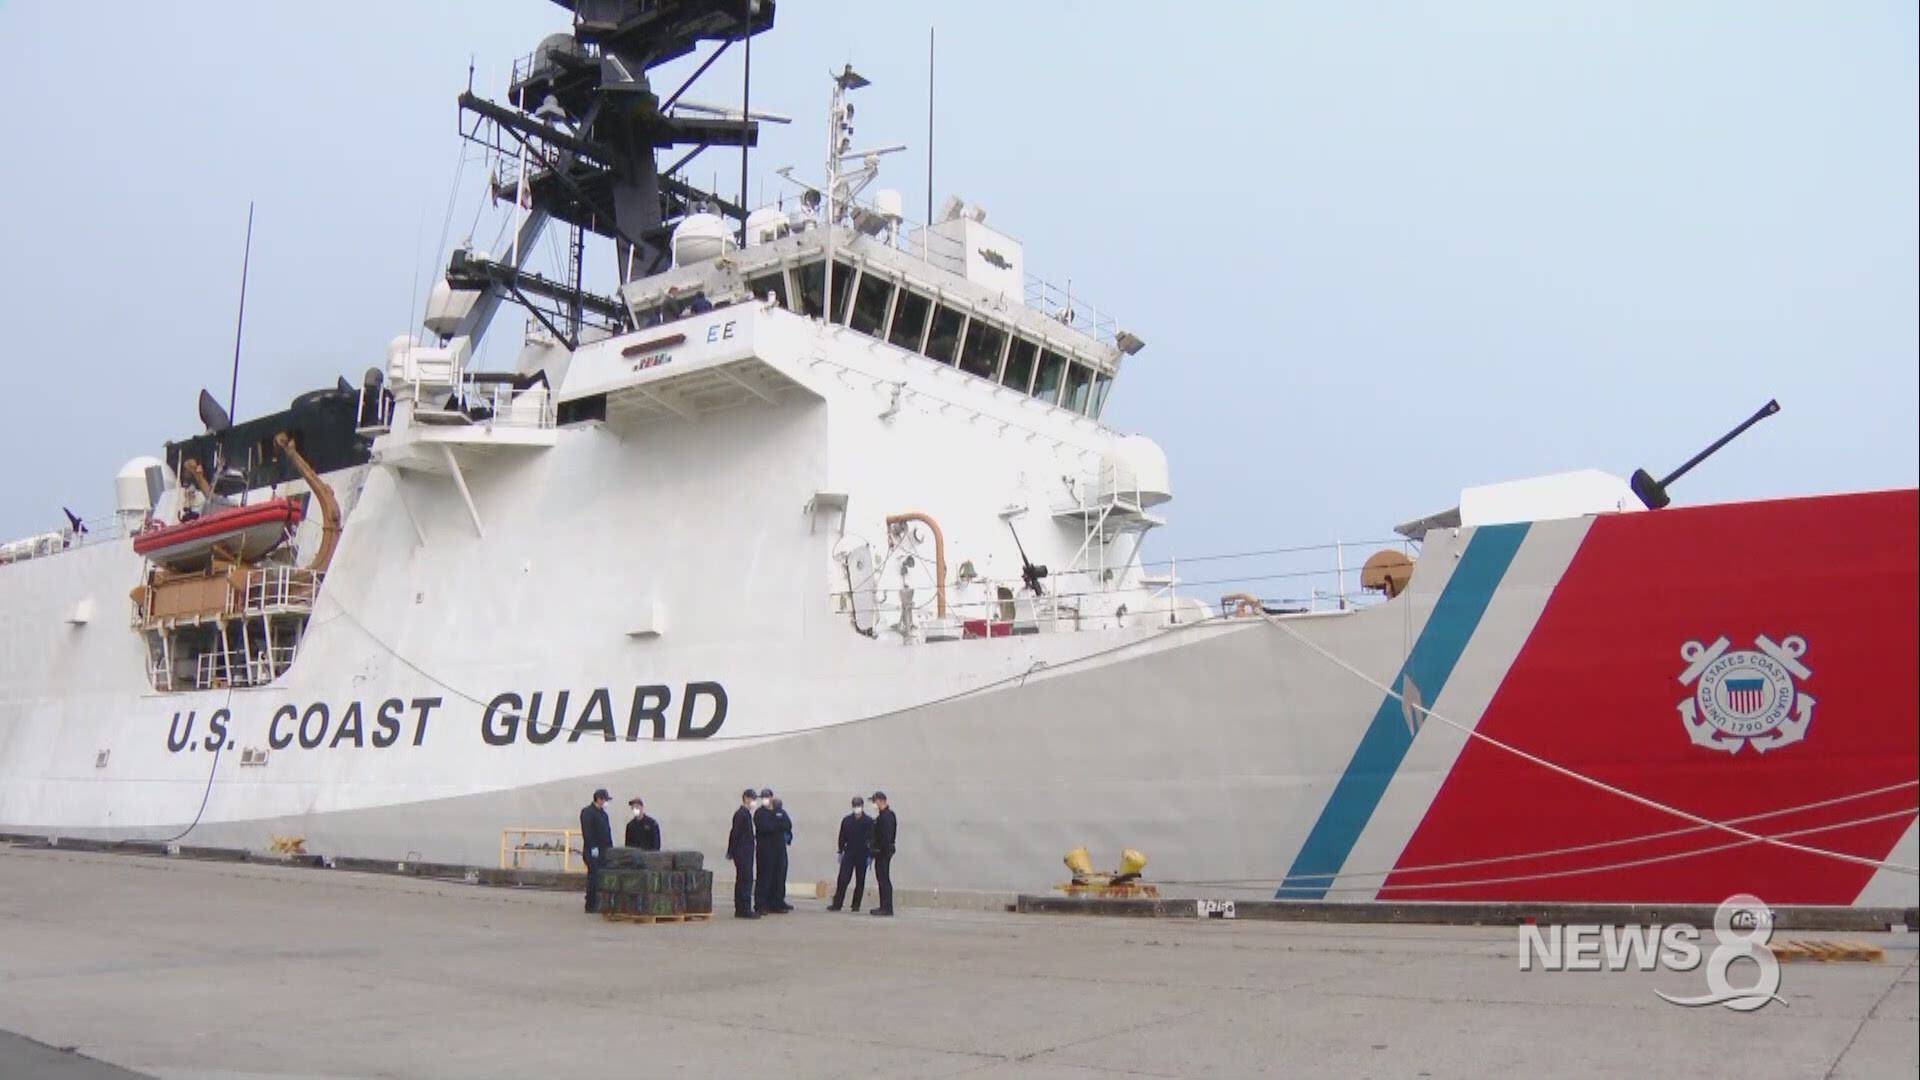 So far in 2020, the Coast Guard has made more than 171 busts, seized more than 282,000 pounds of cocaine and 57,000 pounds of marijuana.